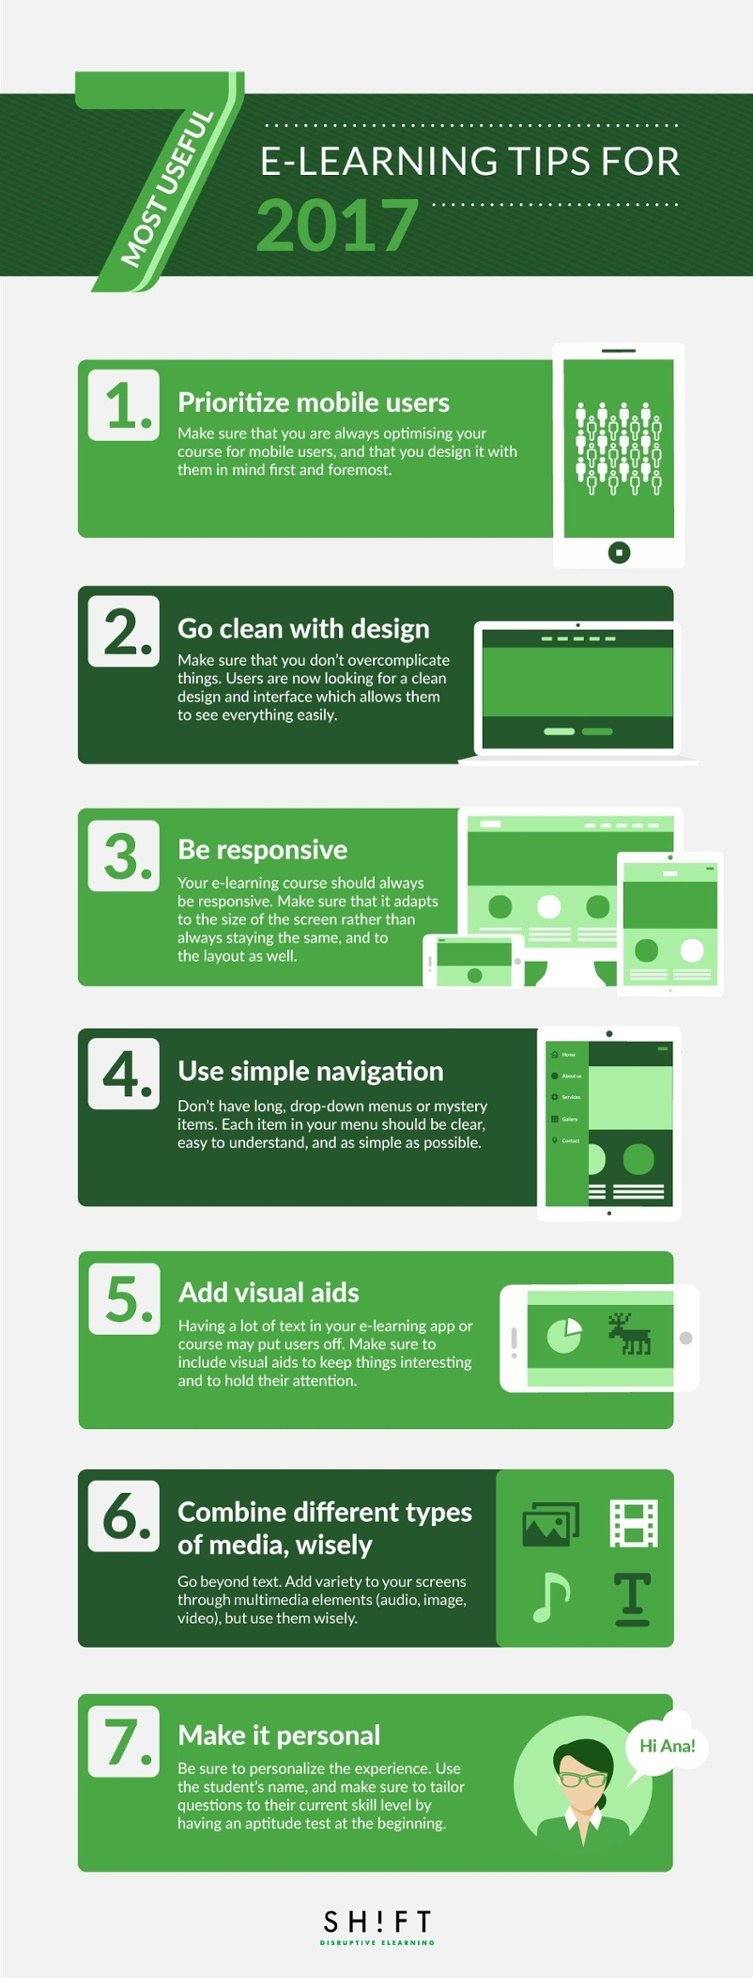 7 Most Useful eLearning Tips for 2017 Infographic